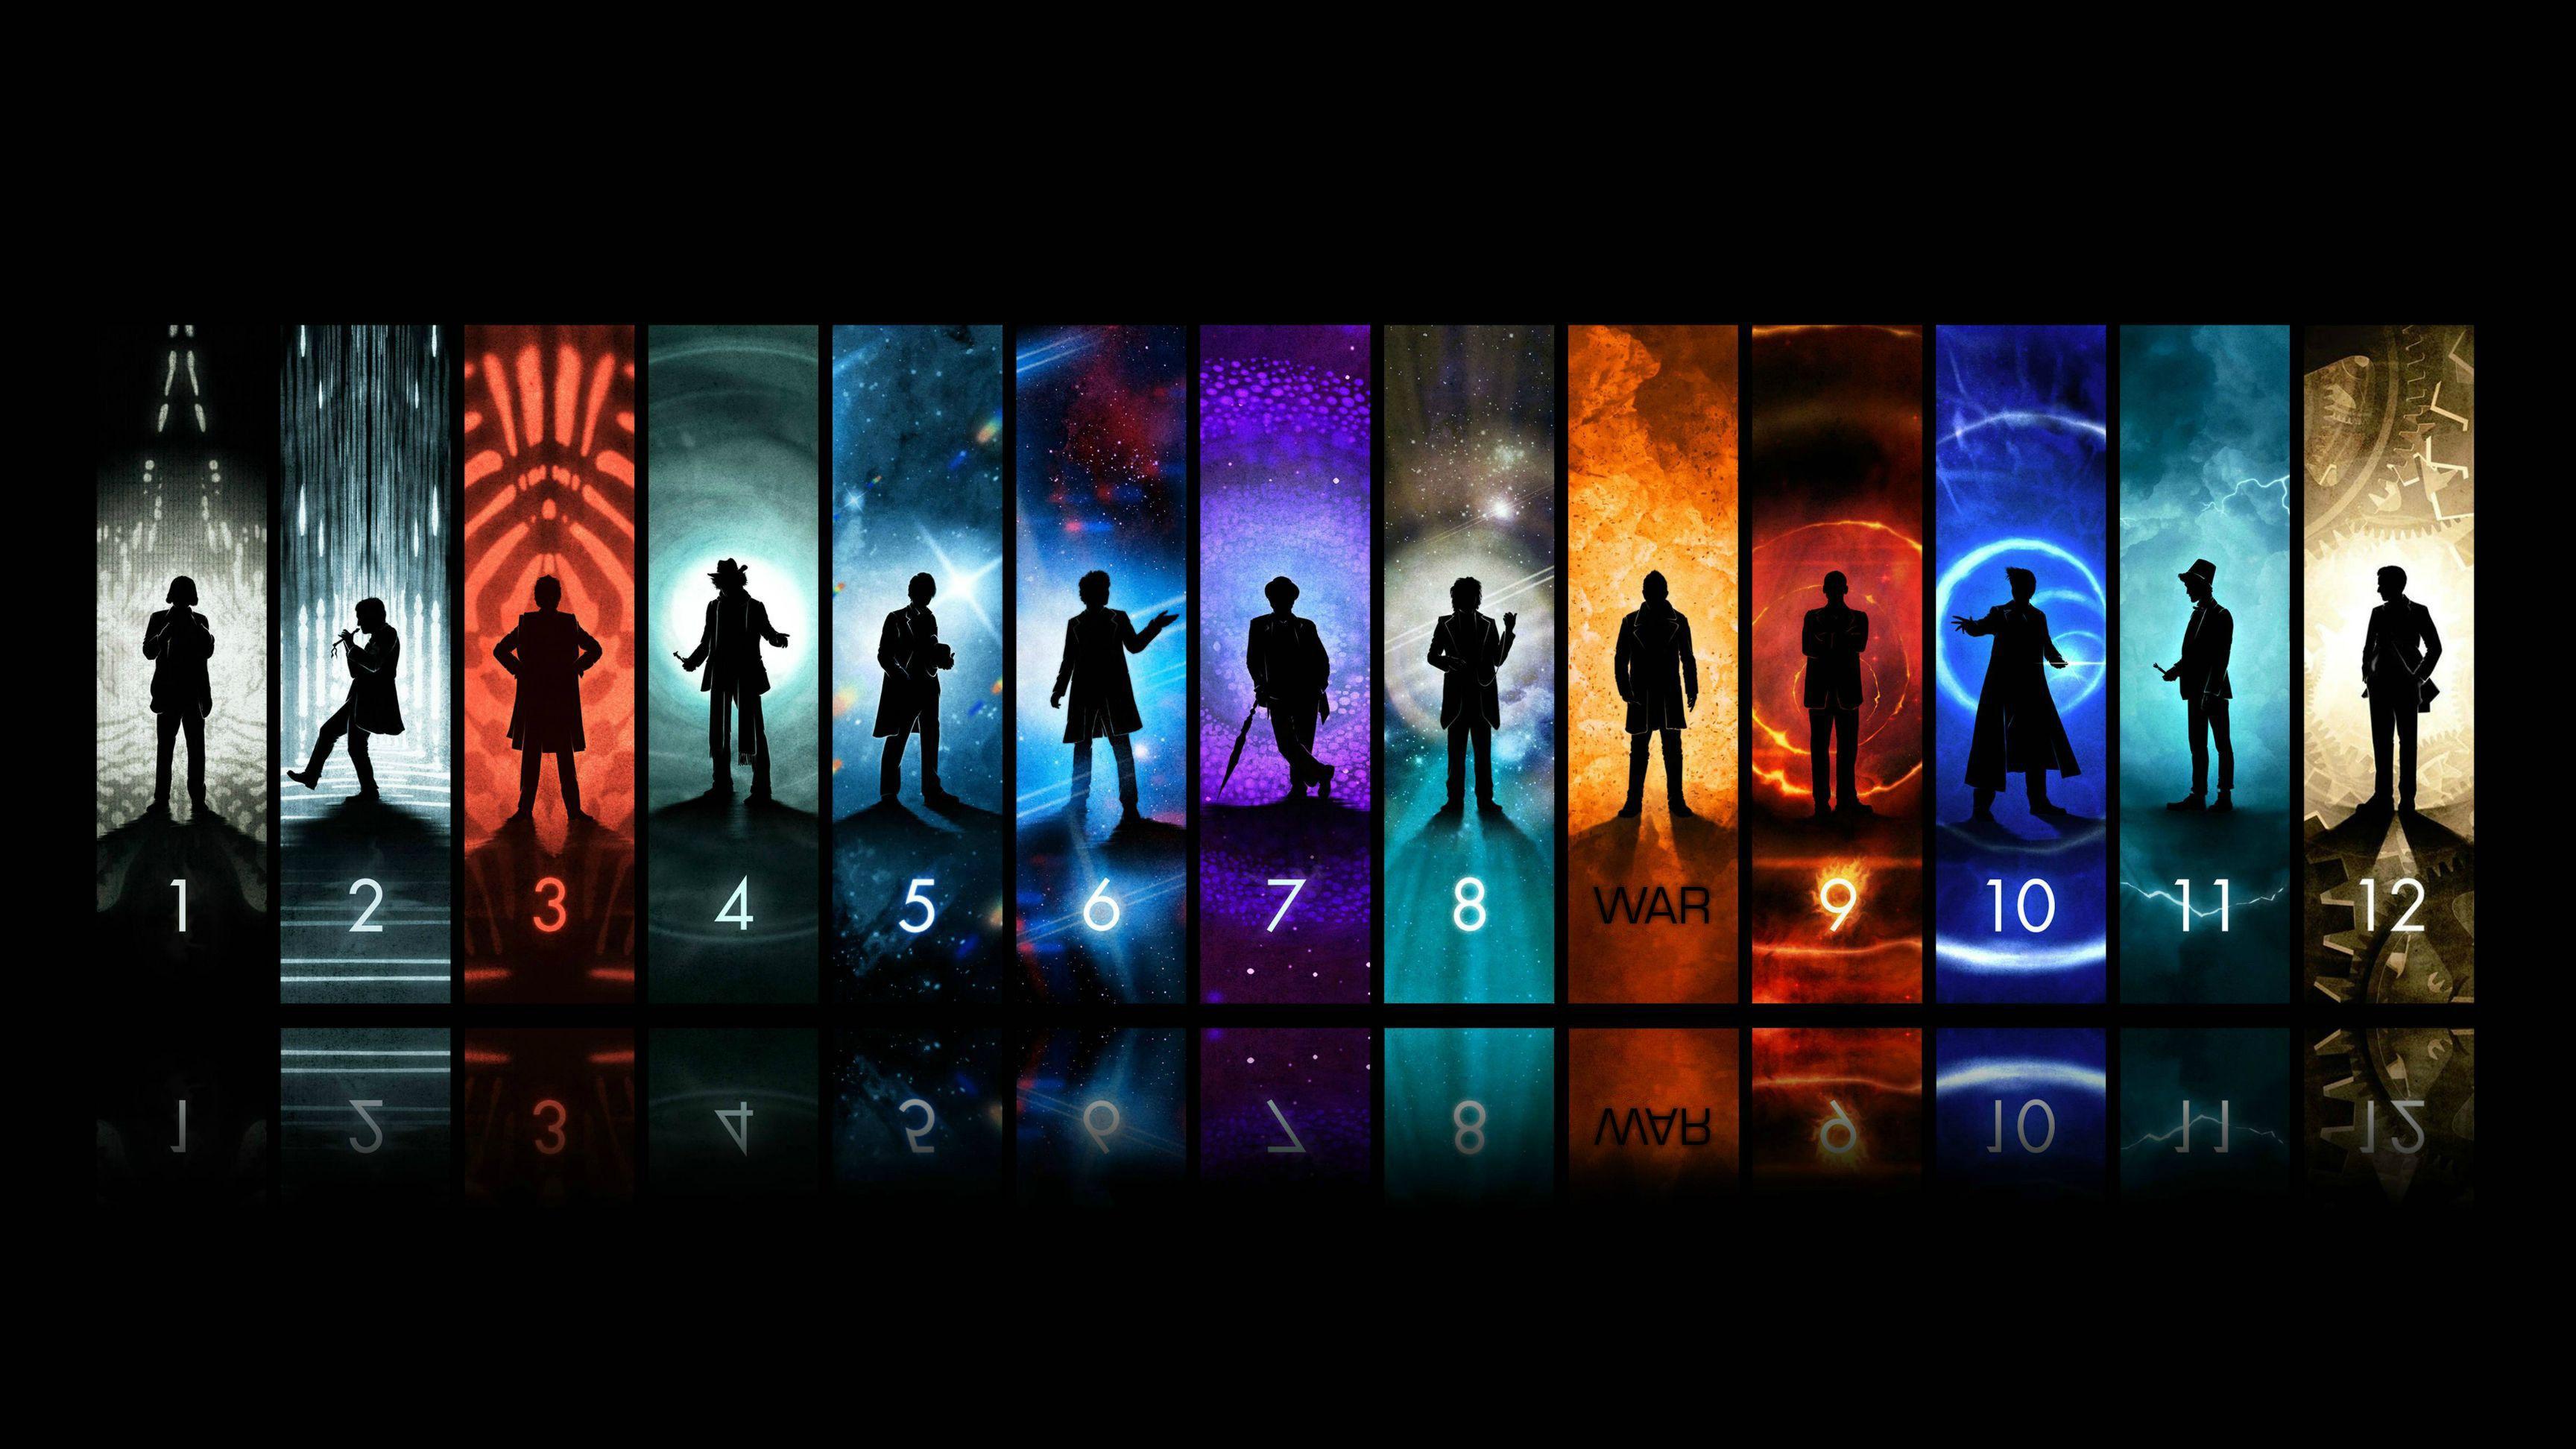 Doctor Who Wallpaper (1 through 12 with War). Doctor who